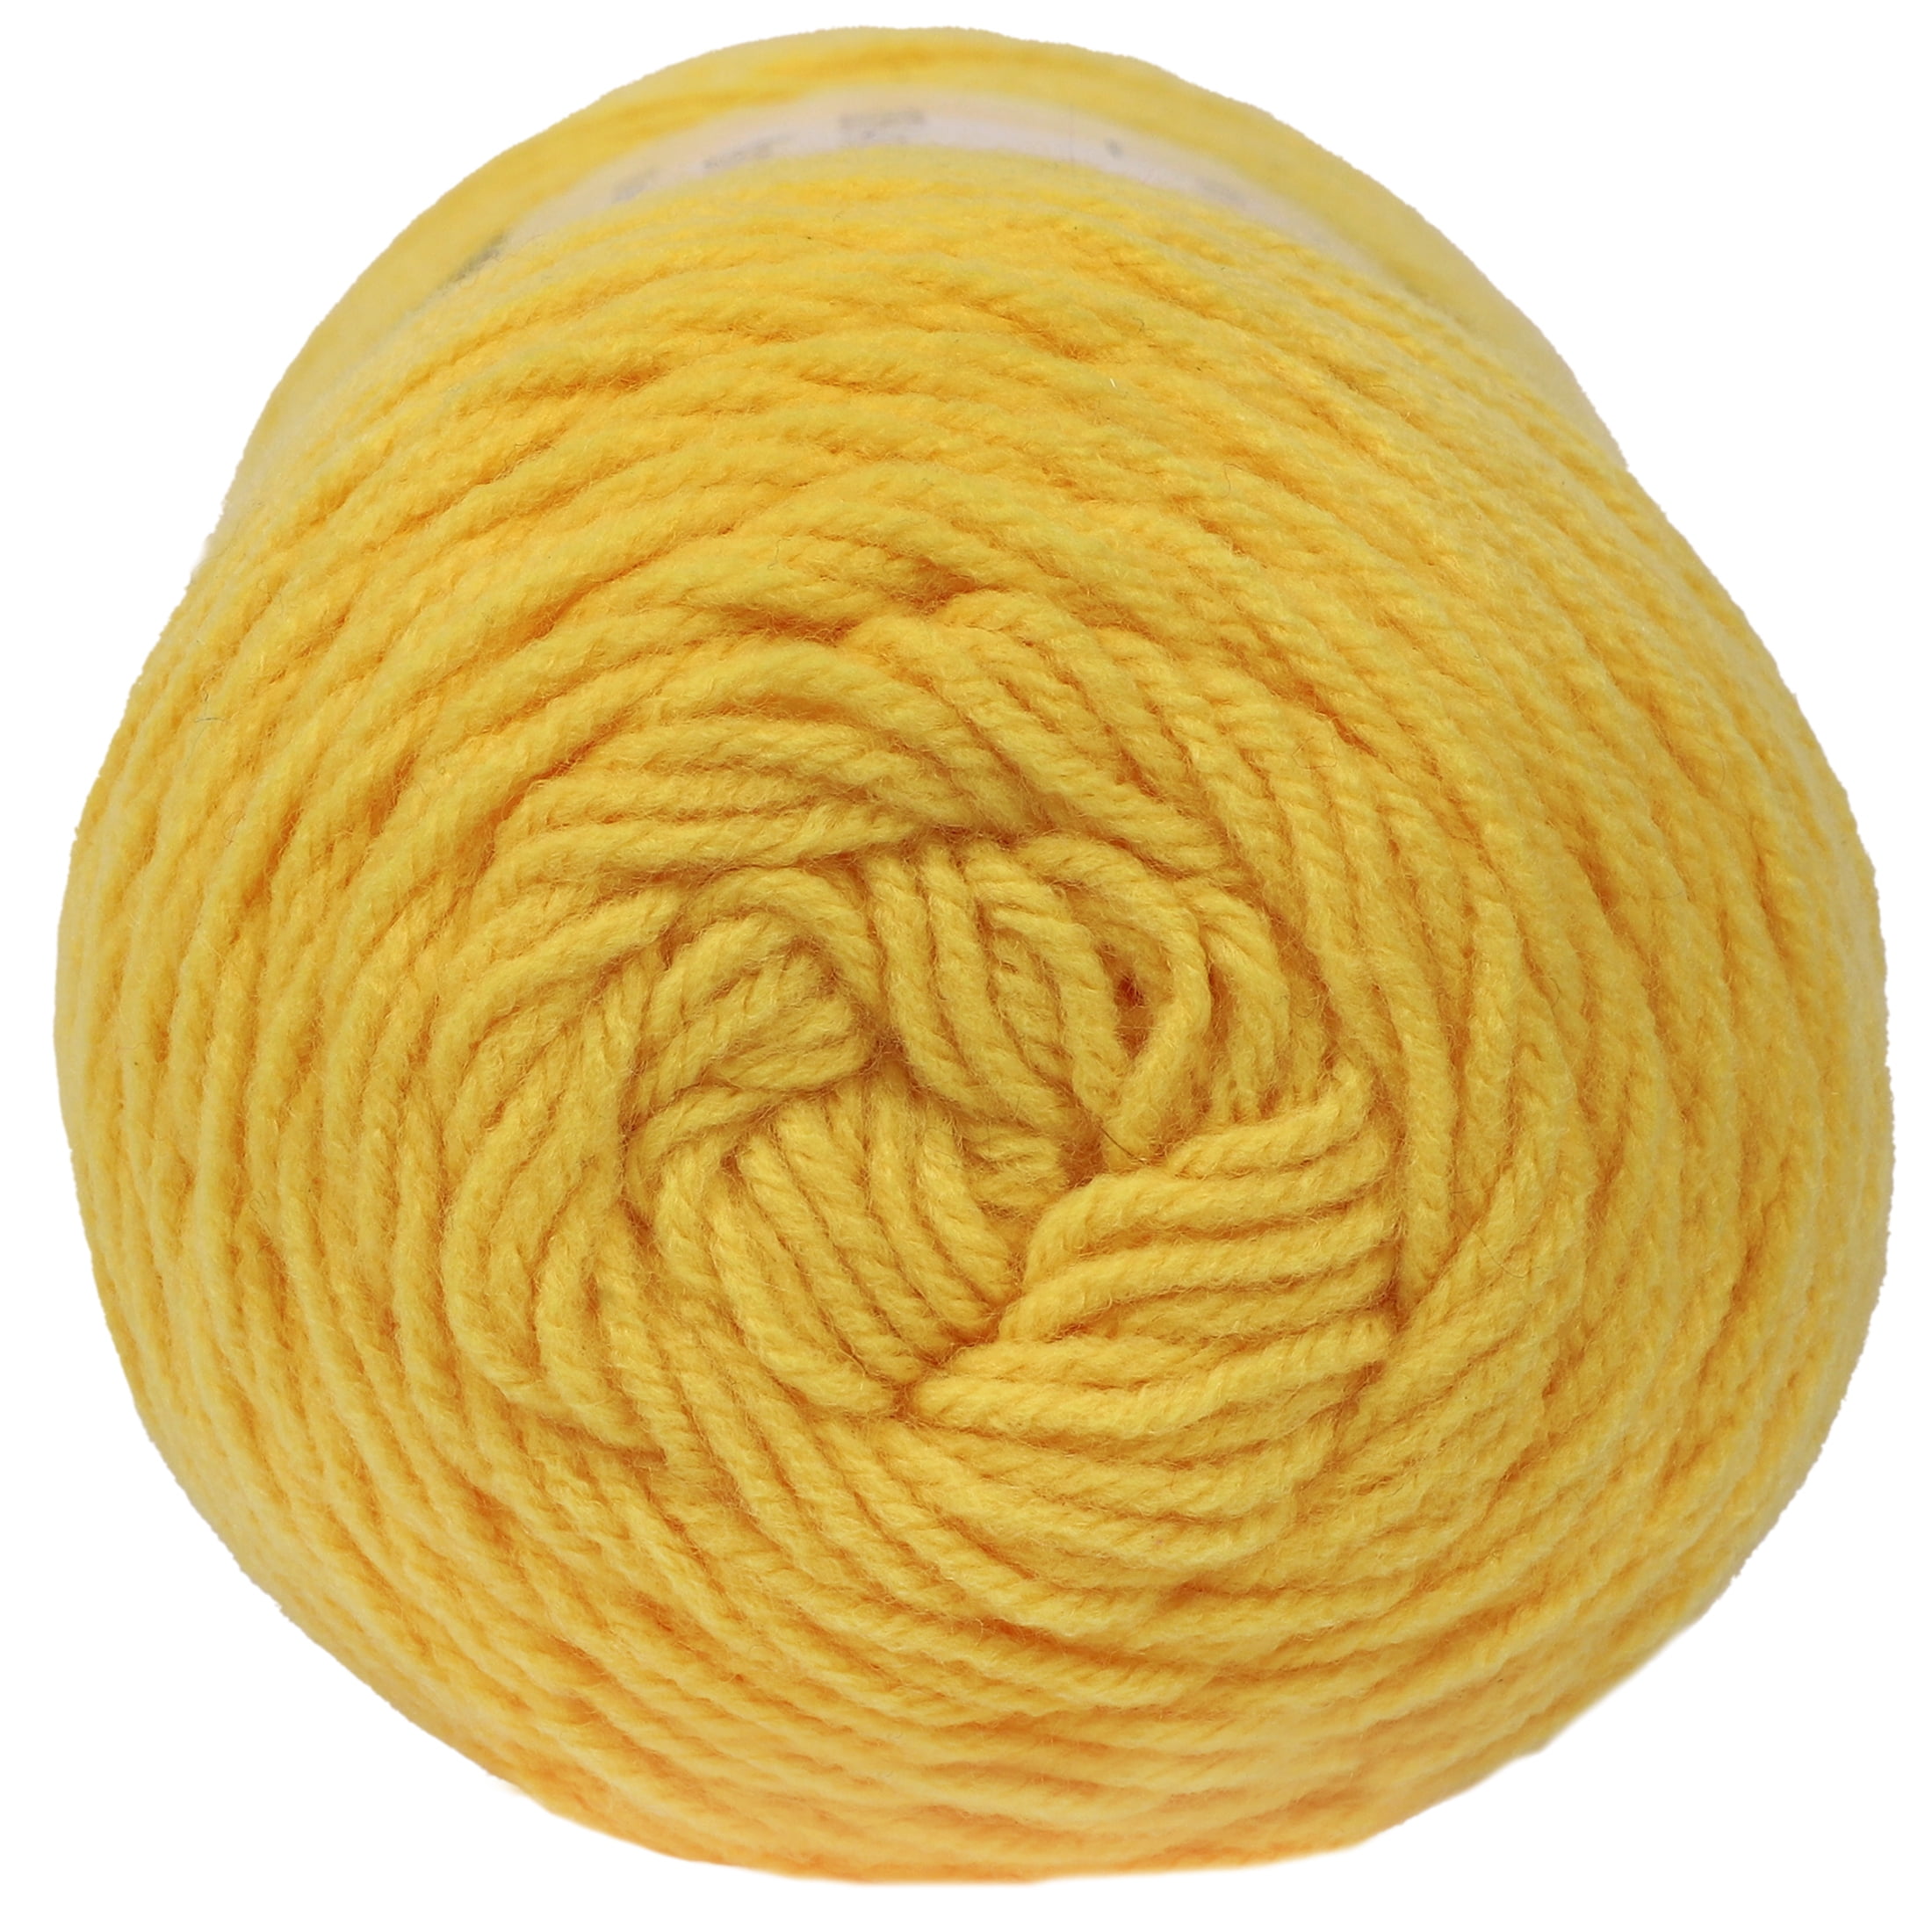 Mainstays Acrylic Yarn, 7 oz ~ 1 Skein (Multiple Colors) SALE!!! (Limited  Time) – ASA College: Florida